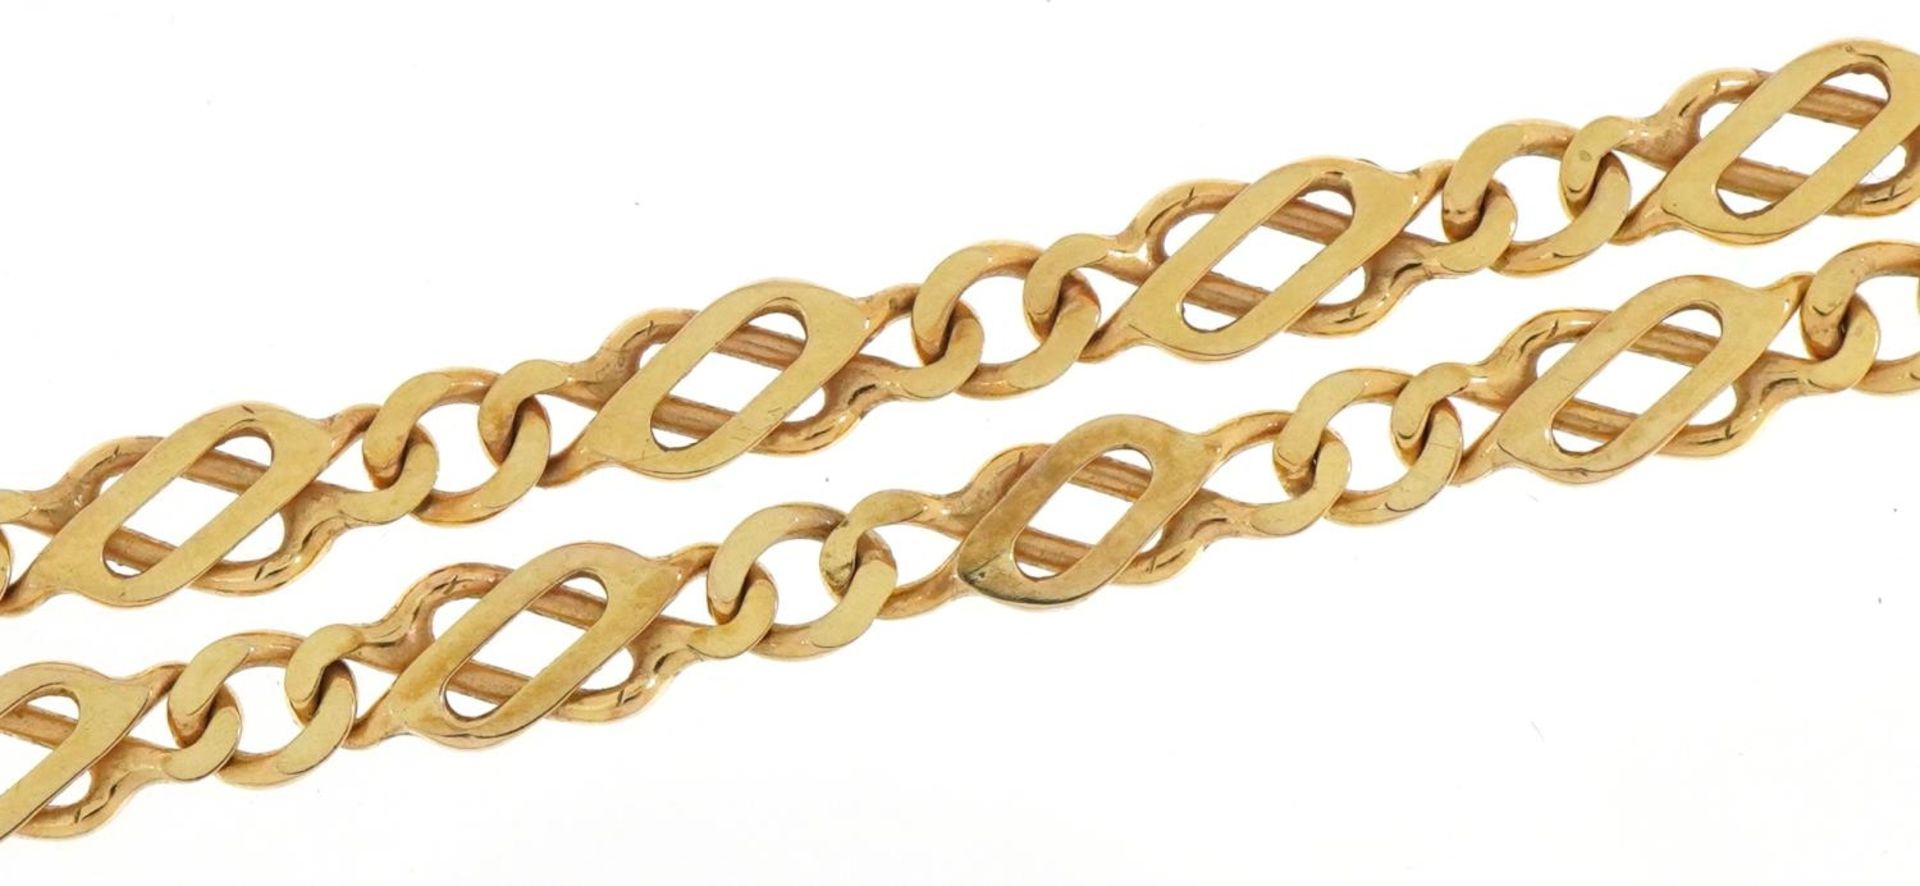 9ct gold multi link necklace, 46cm in length, 12.5g